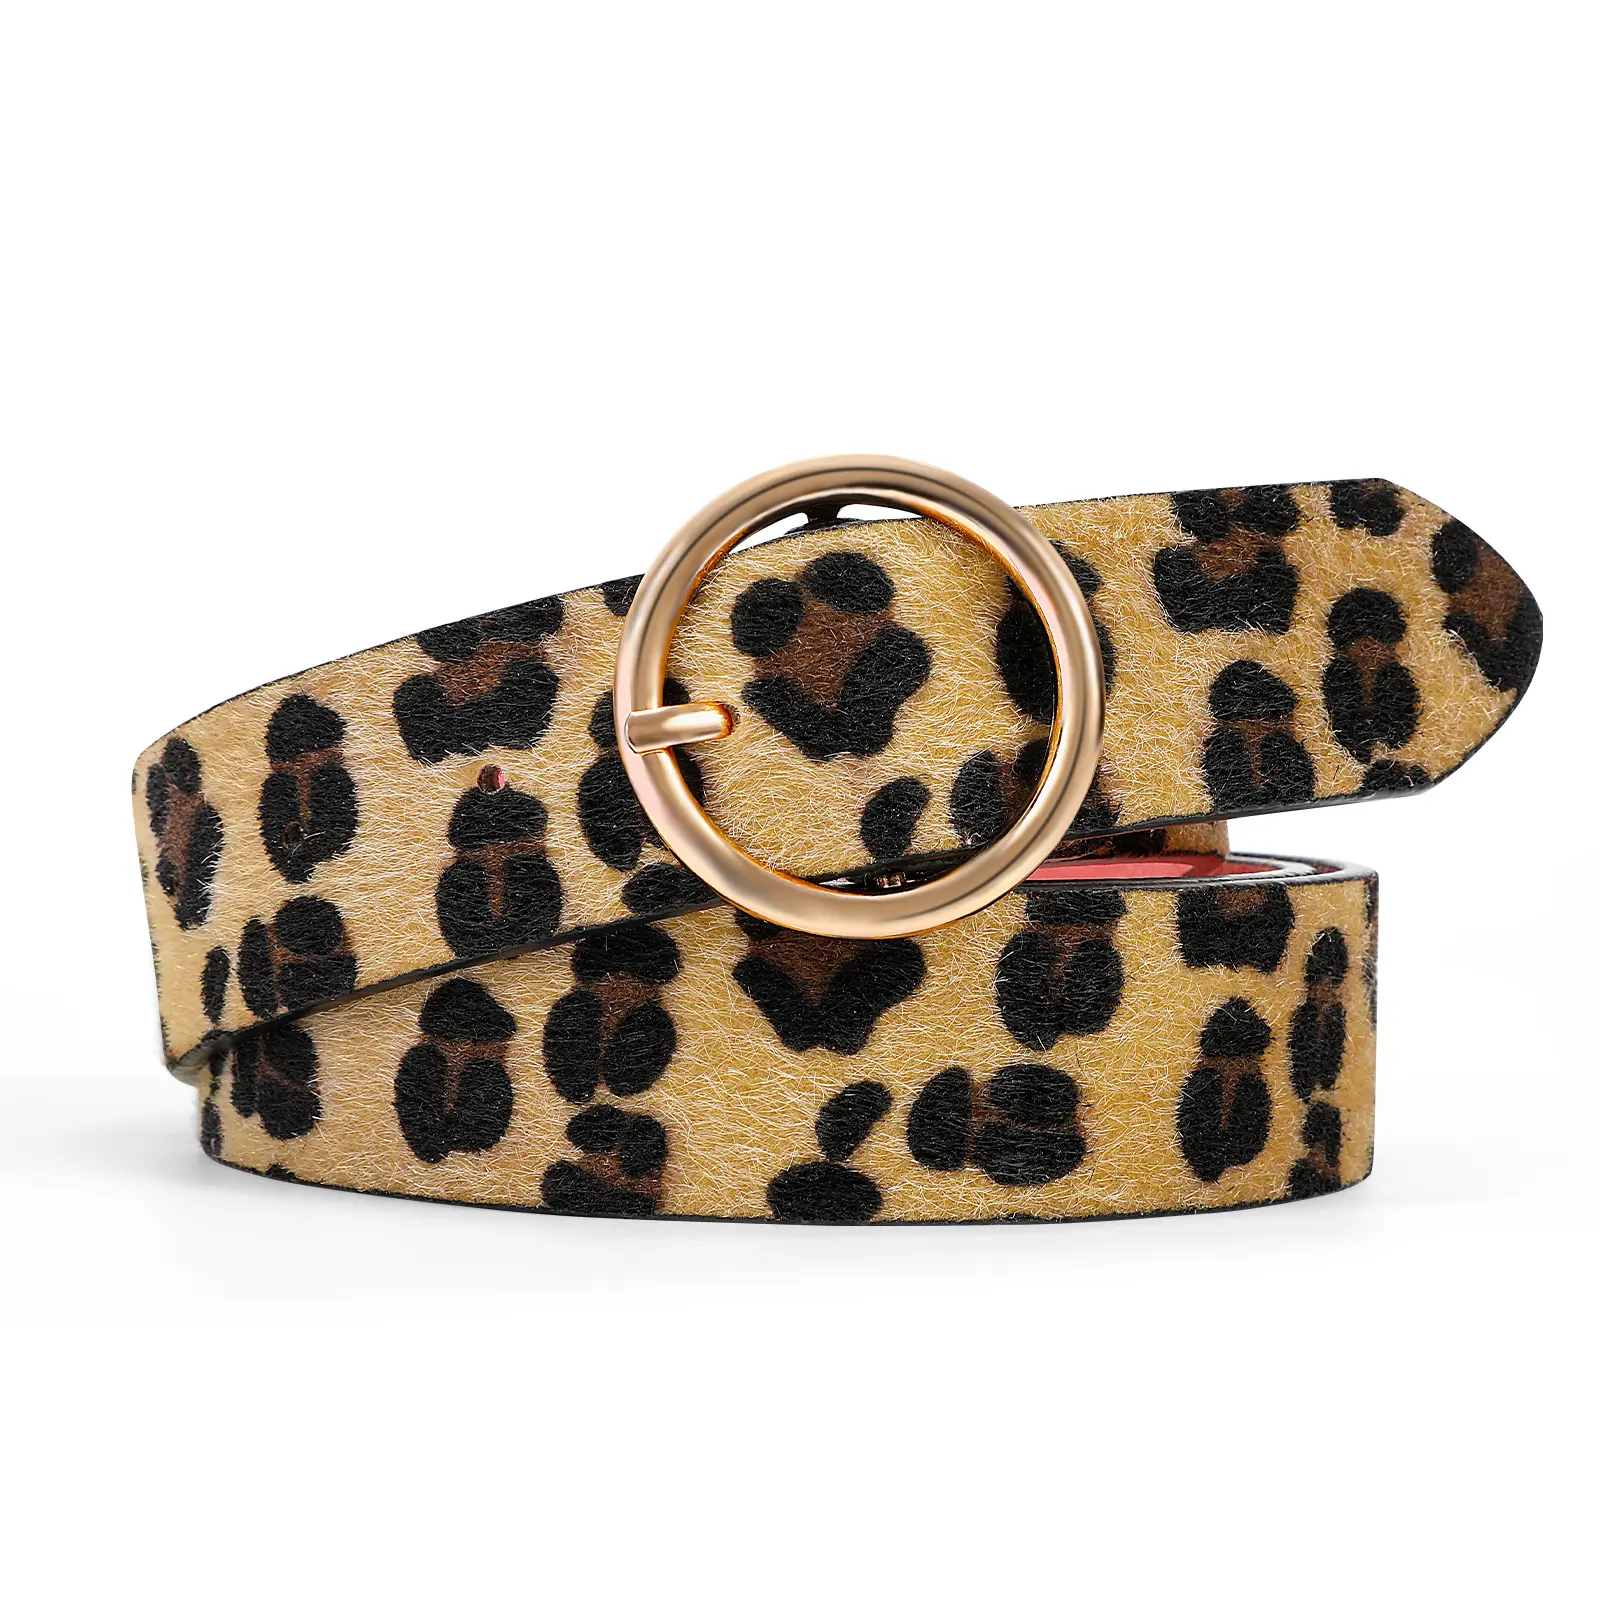 Moda Faux Leather Leopard Print Waistbelt Logotipo Personalizado O-ring Design Ally Buckle PU Leather Belt Para As Mulheres